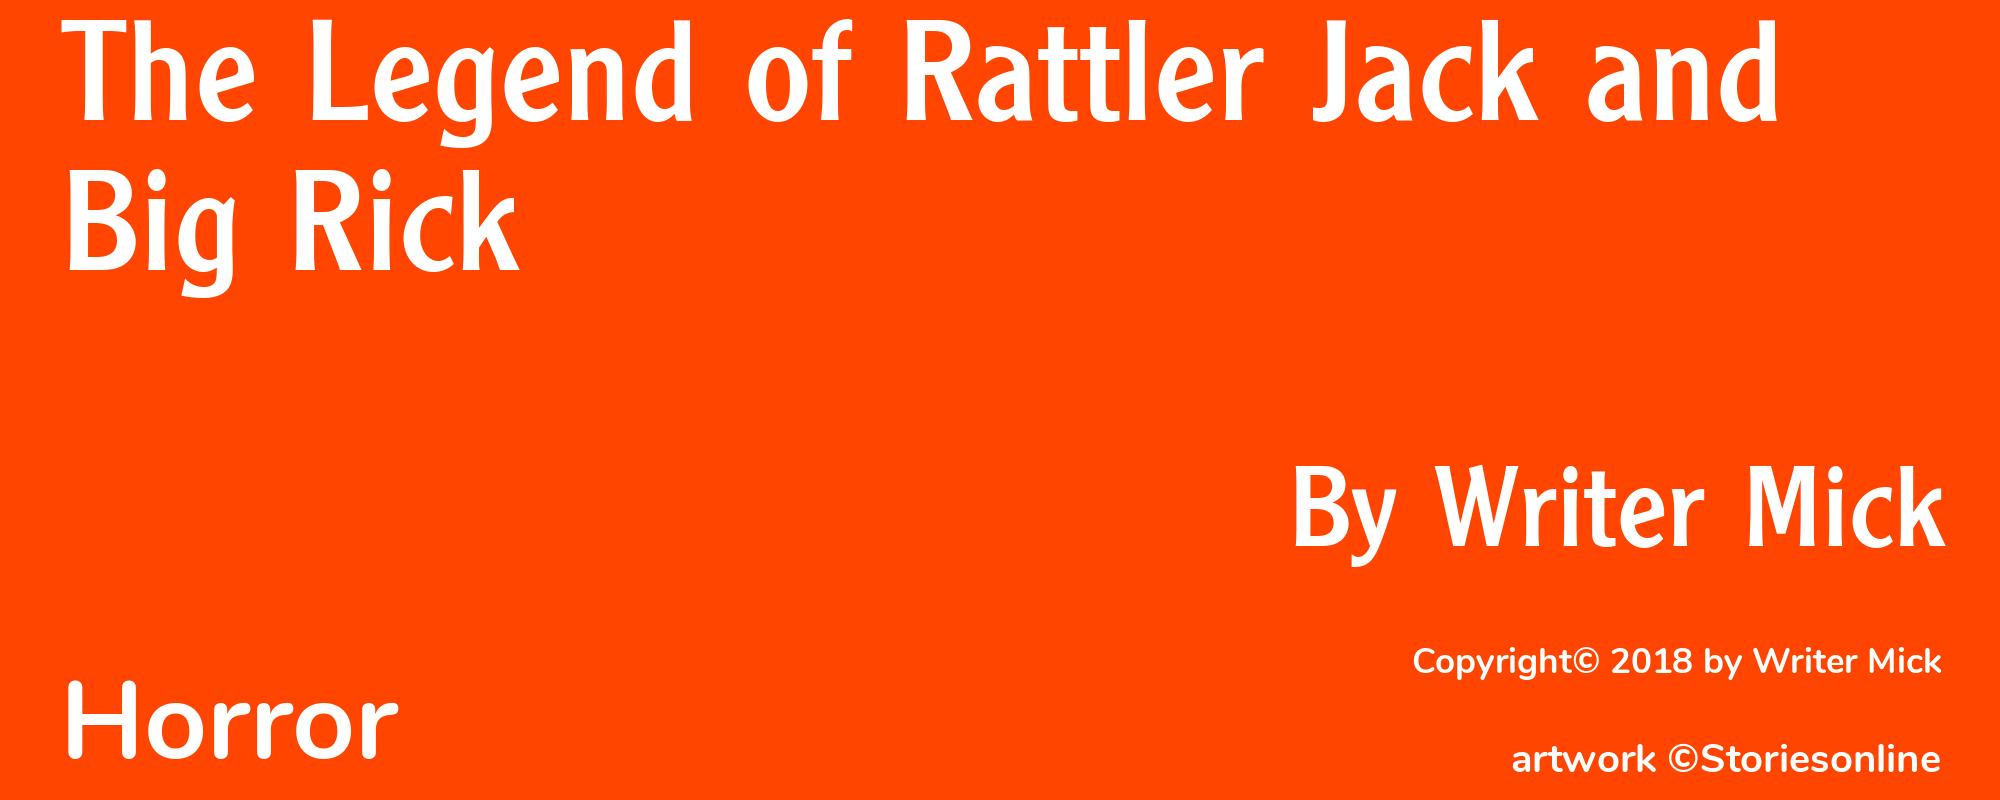 The Legend of Rattler Jack and Big Rick - Cover